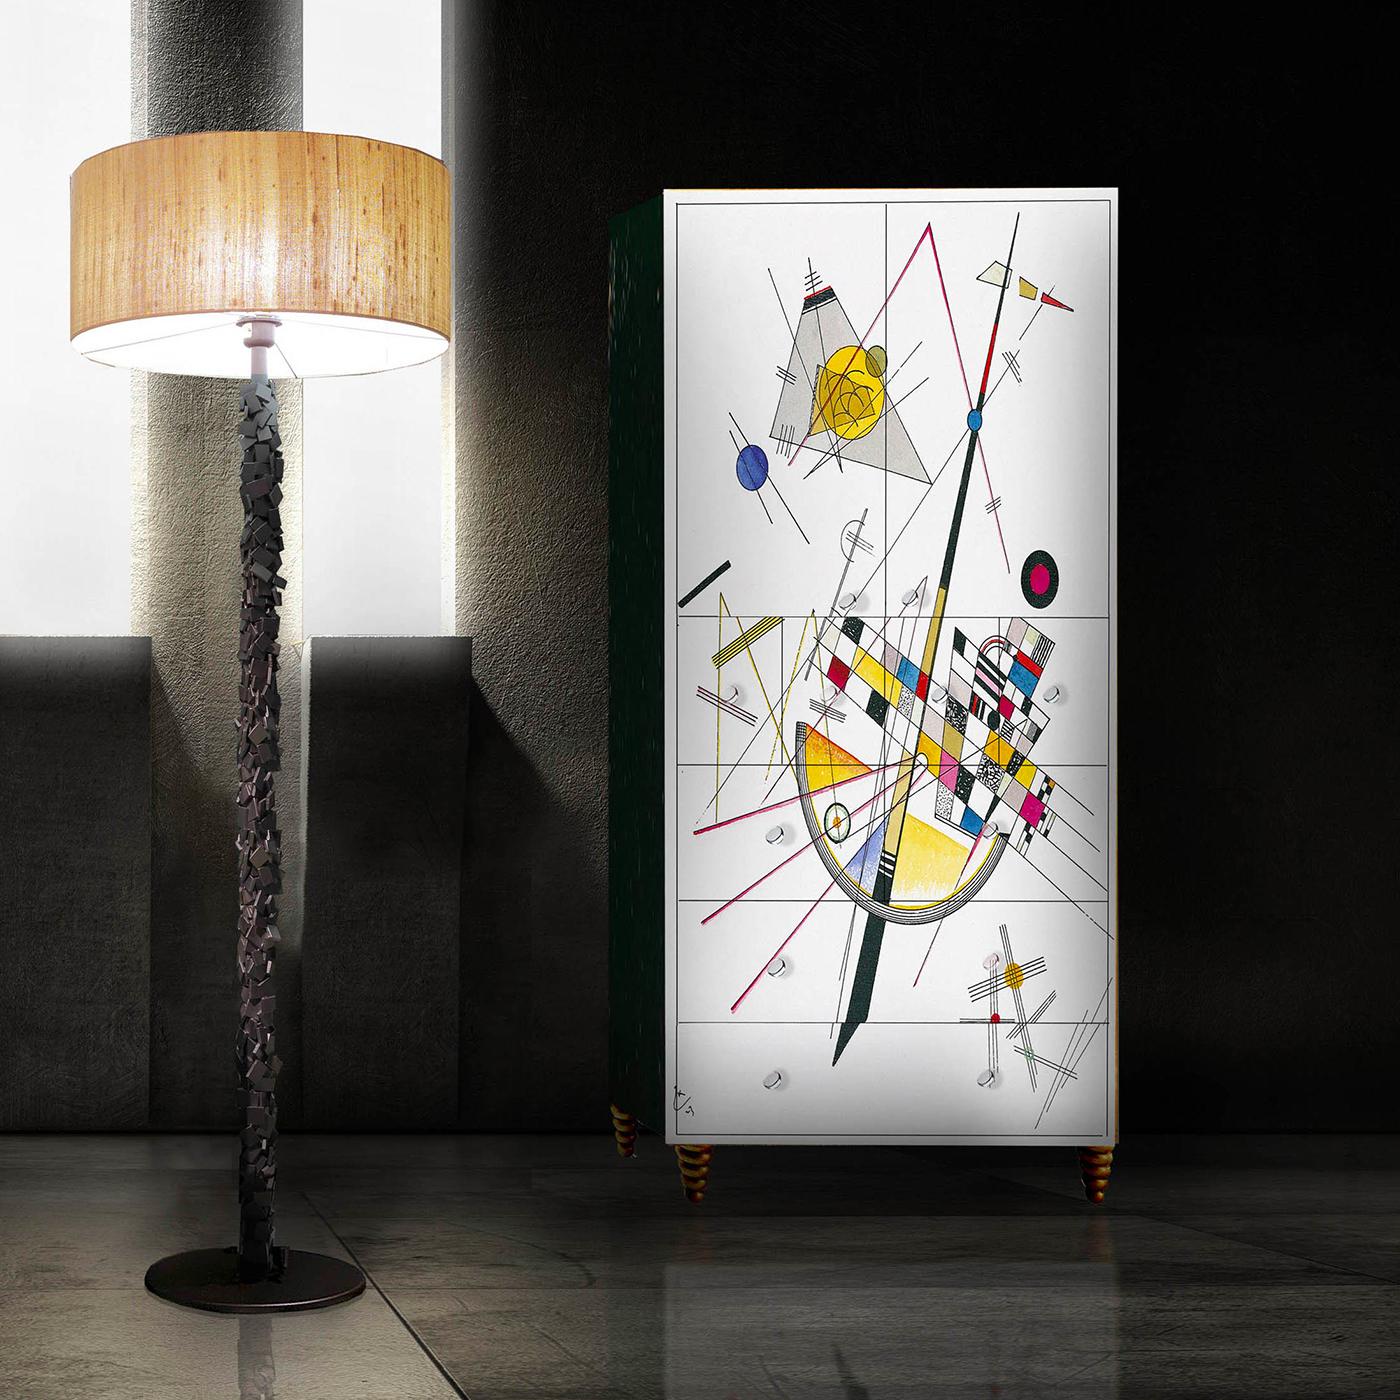 This unique cupboard is a true work of art. Its bold and elegant front decoration is inspired by the dynamic geometries by Kandinsky and painted entirely by hand. The rectangular wooden structure rests on four conical feet with striking grooves, and